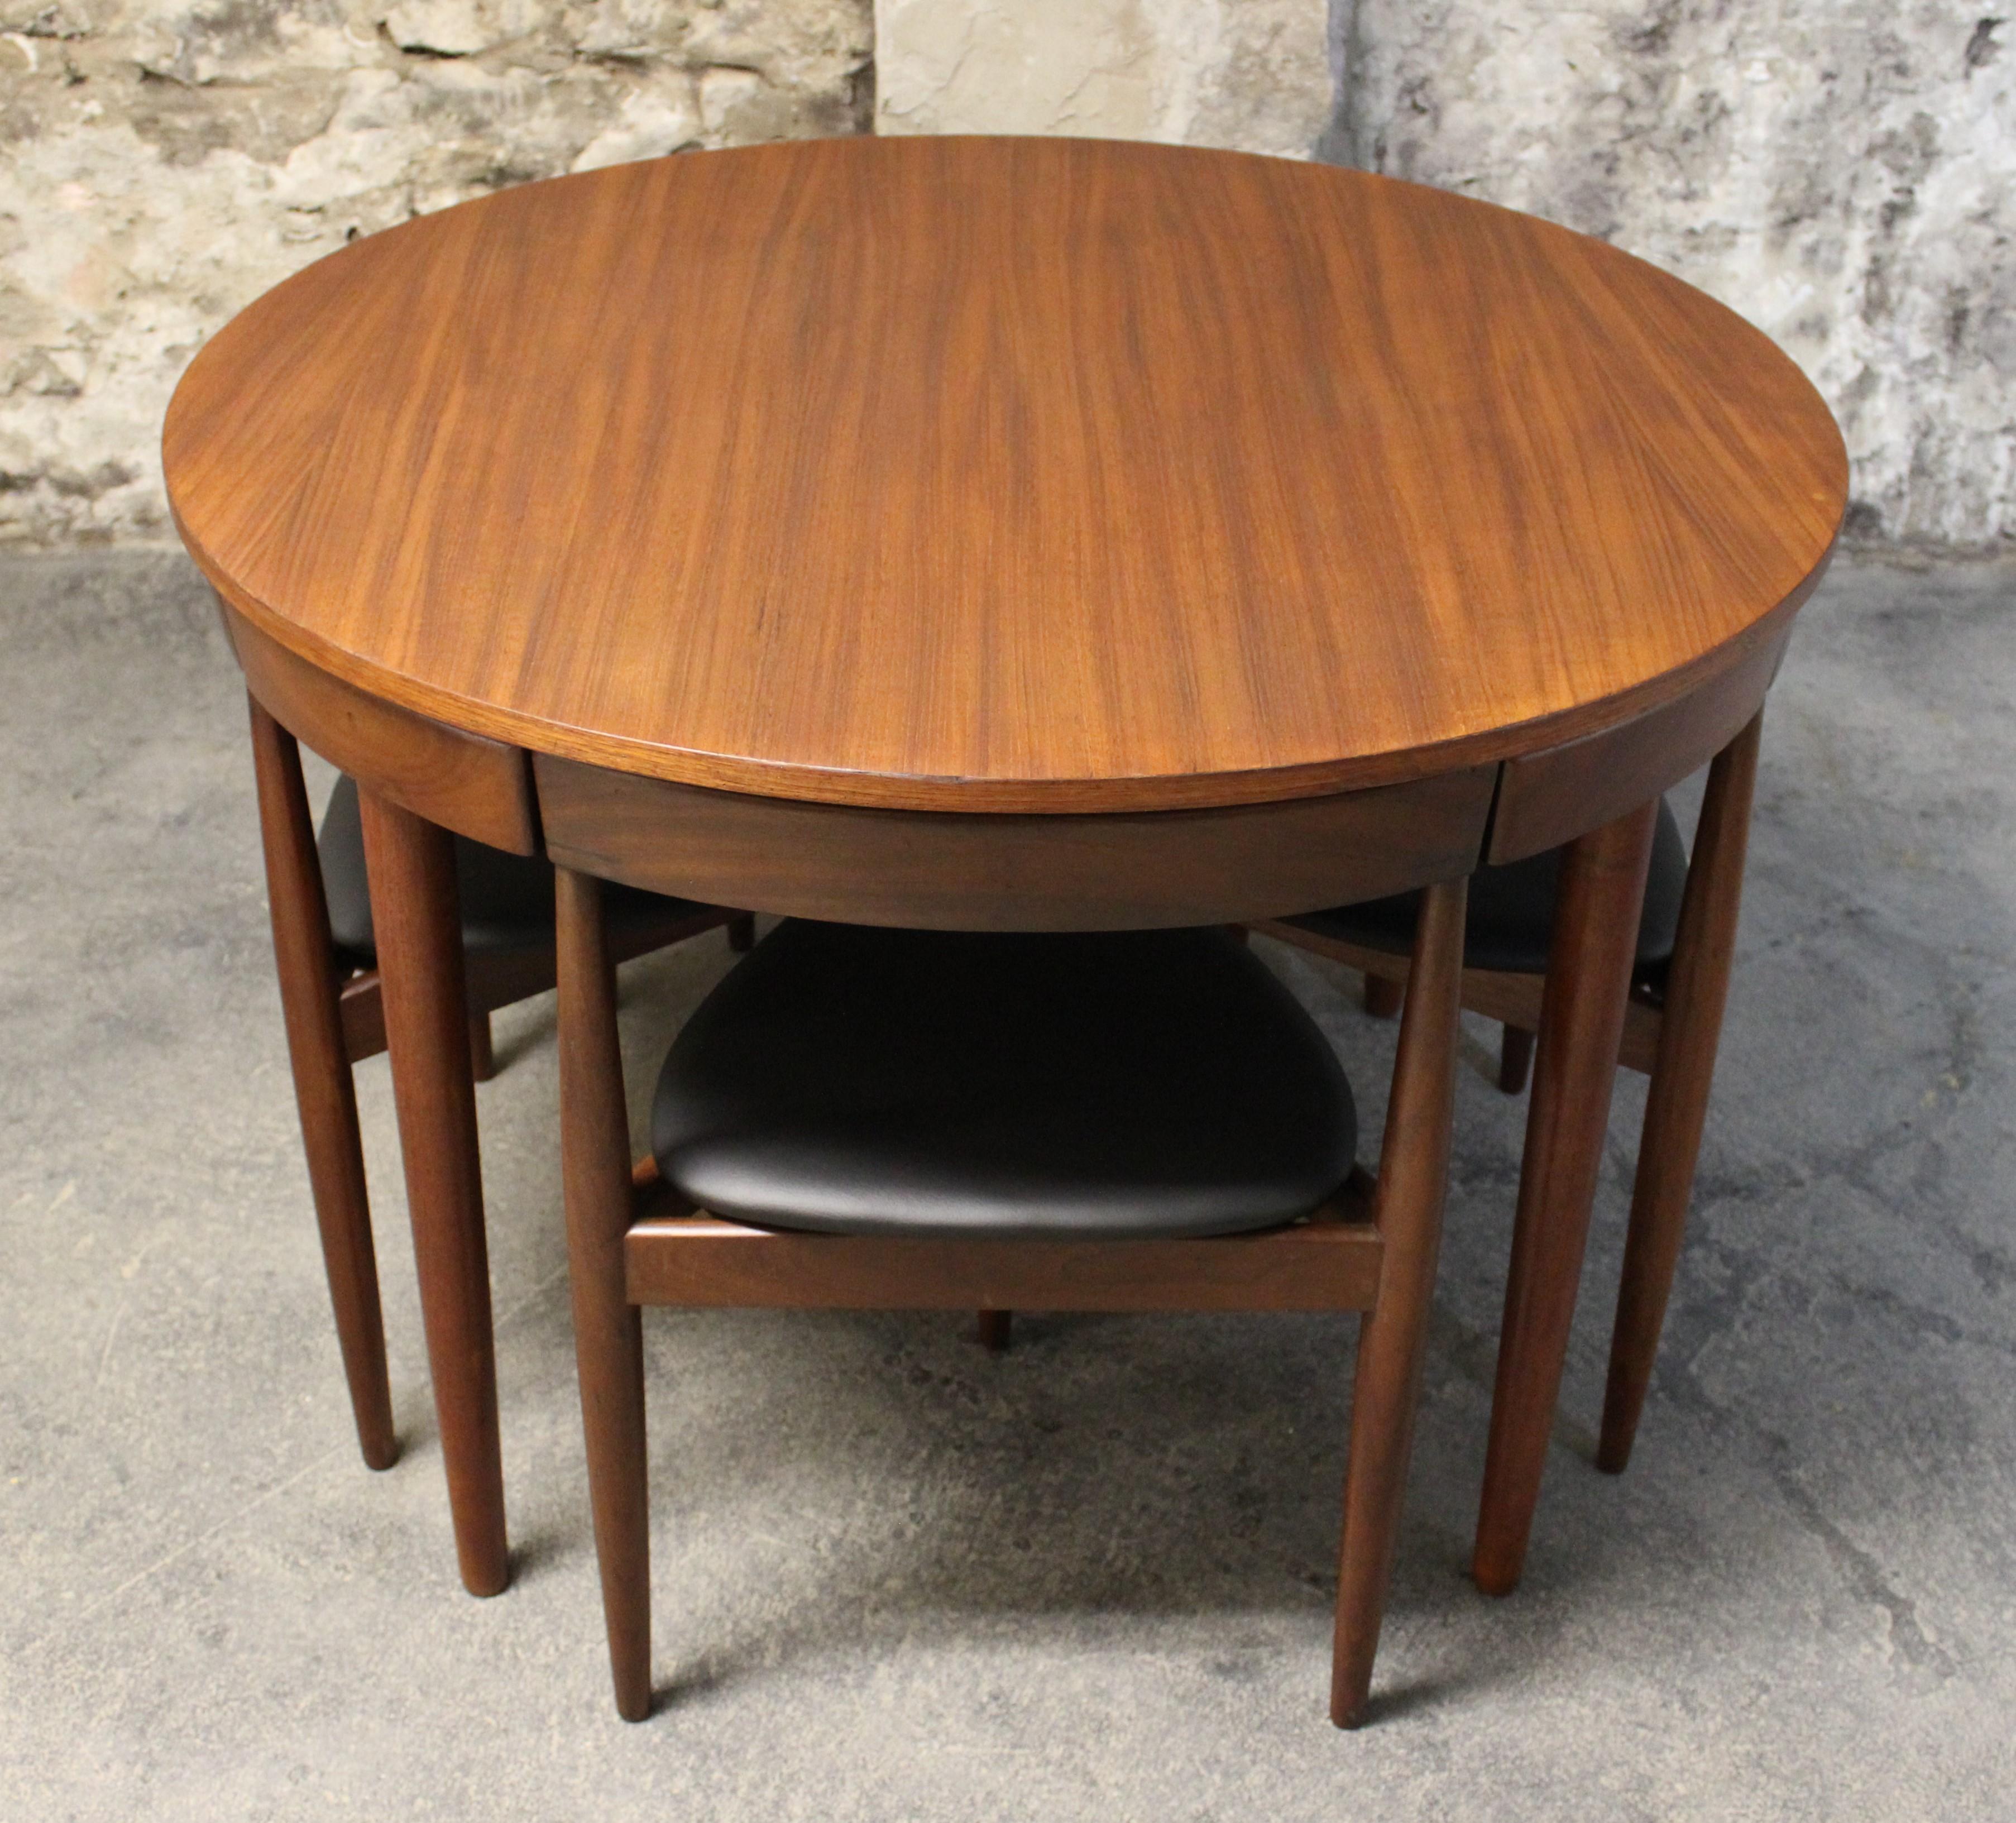 This teak Roundette model dining set, consisting of one dining table and four chairs was designed by Hans Olsen, and manufactured by Frem Rojle. The striking three-legged chairs fit smoothly under the table saving on space while giving a clean,